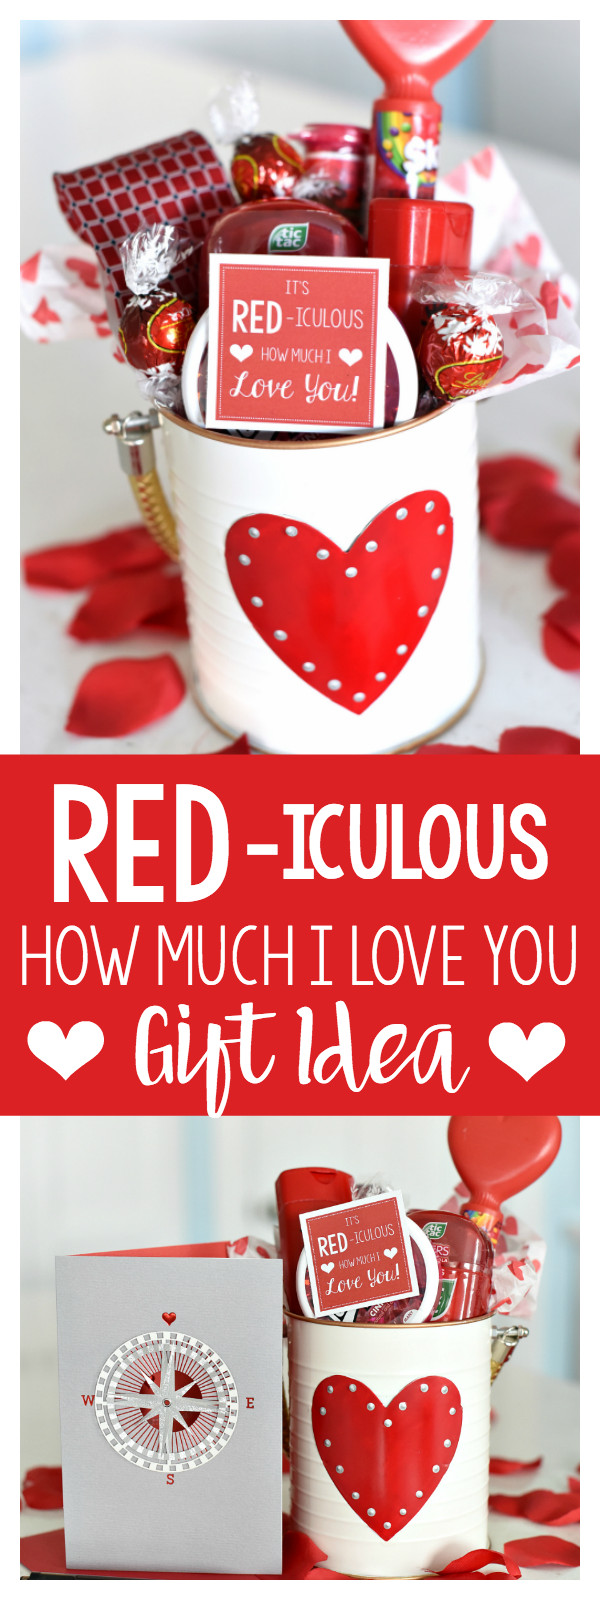 Valentines Gift Ideas For Her Pinterest
 Cute Valentine s Day Gift Idea RED iculous Basket